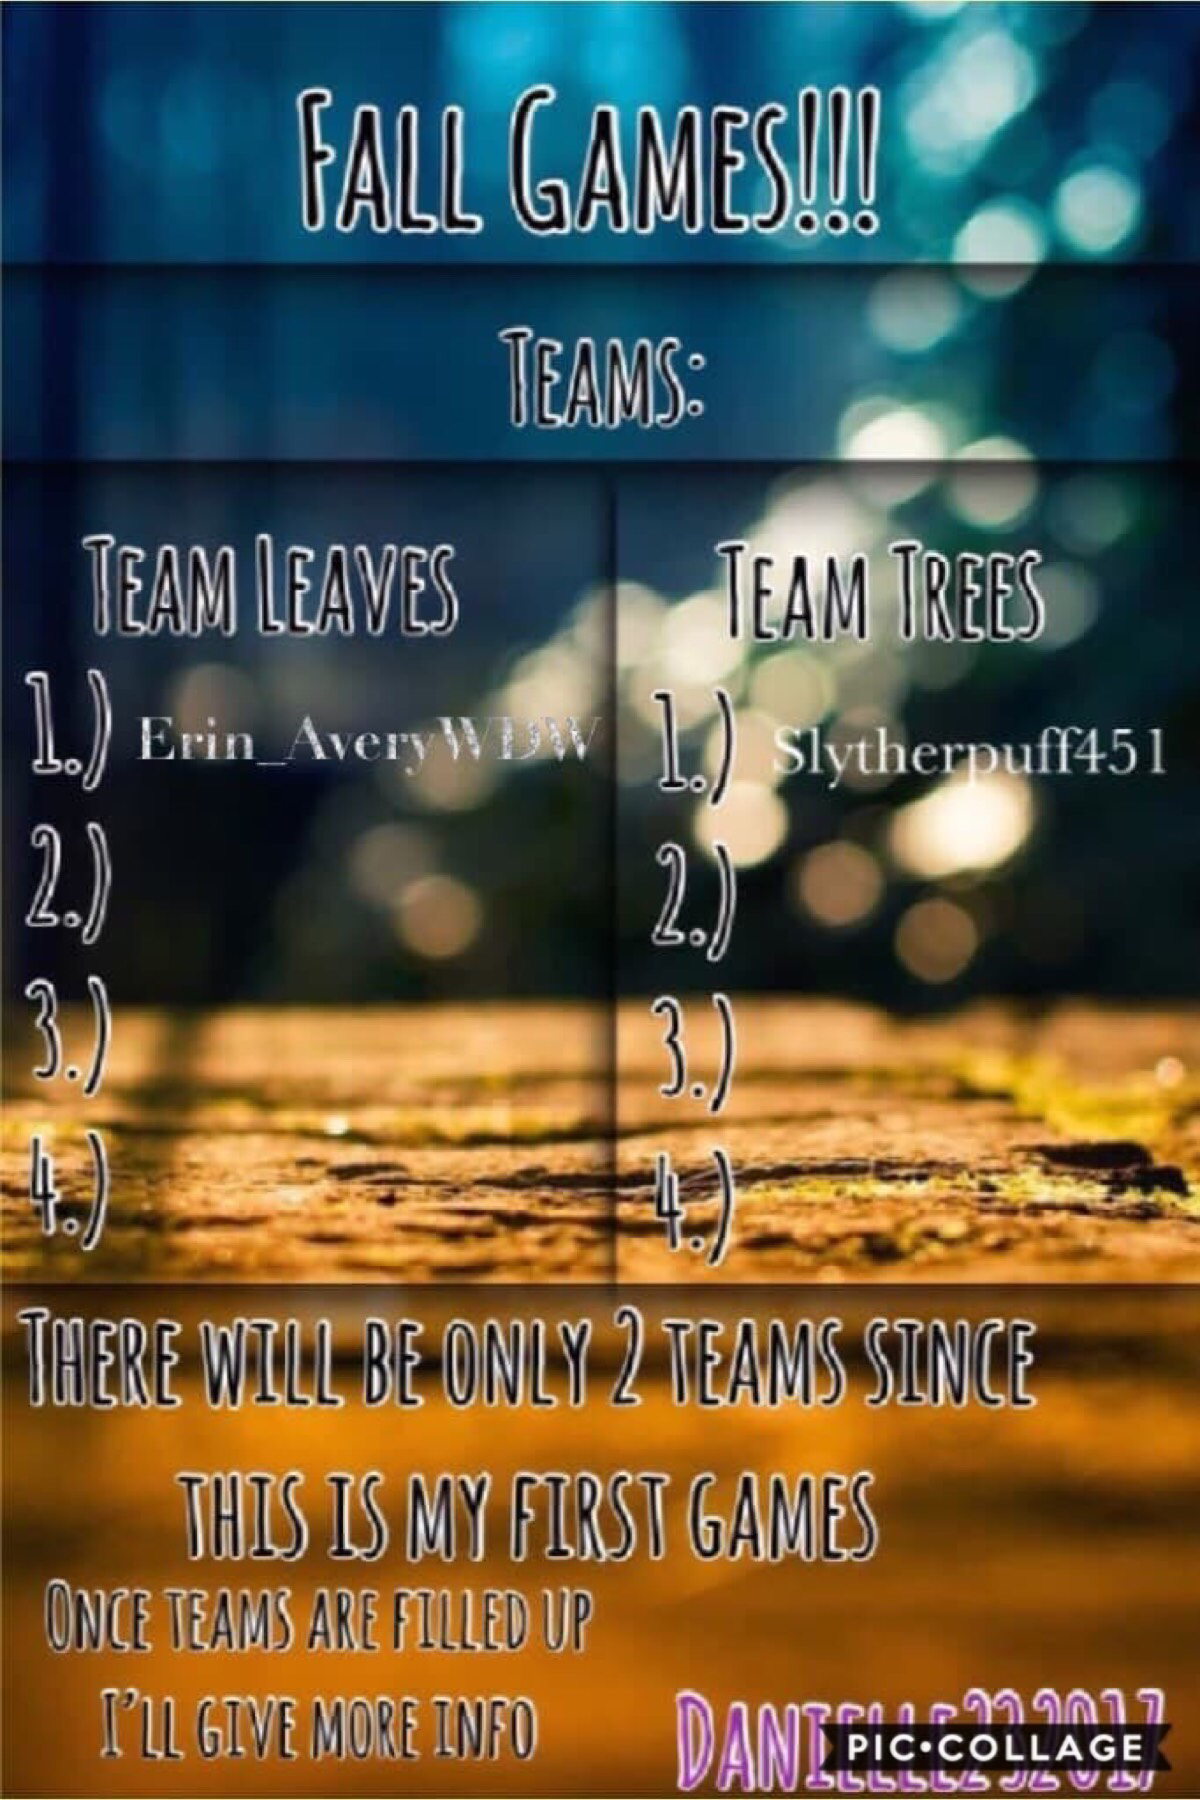 Tap
3 more people needed for both teams!